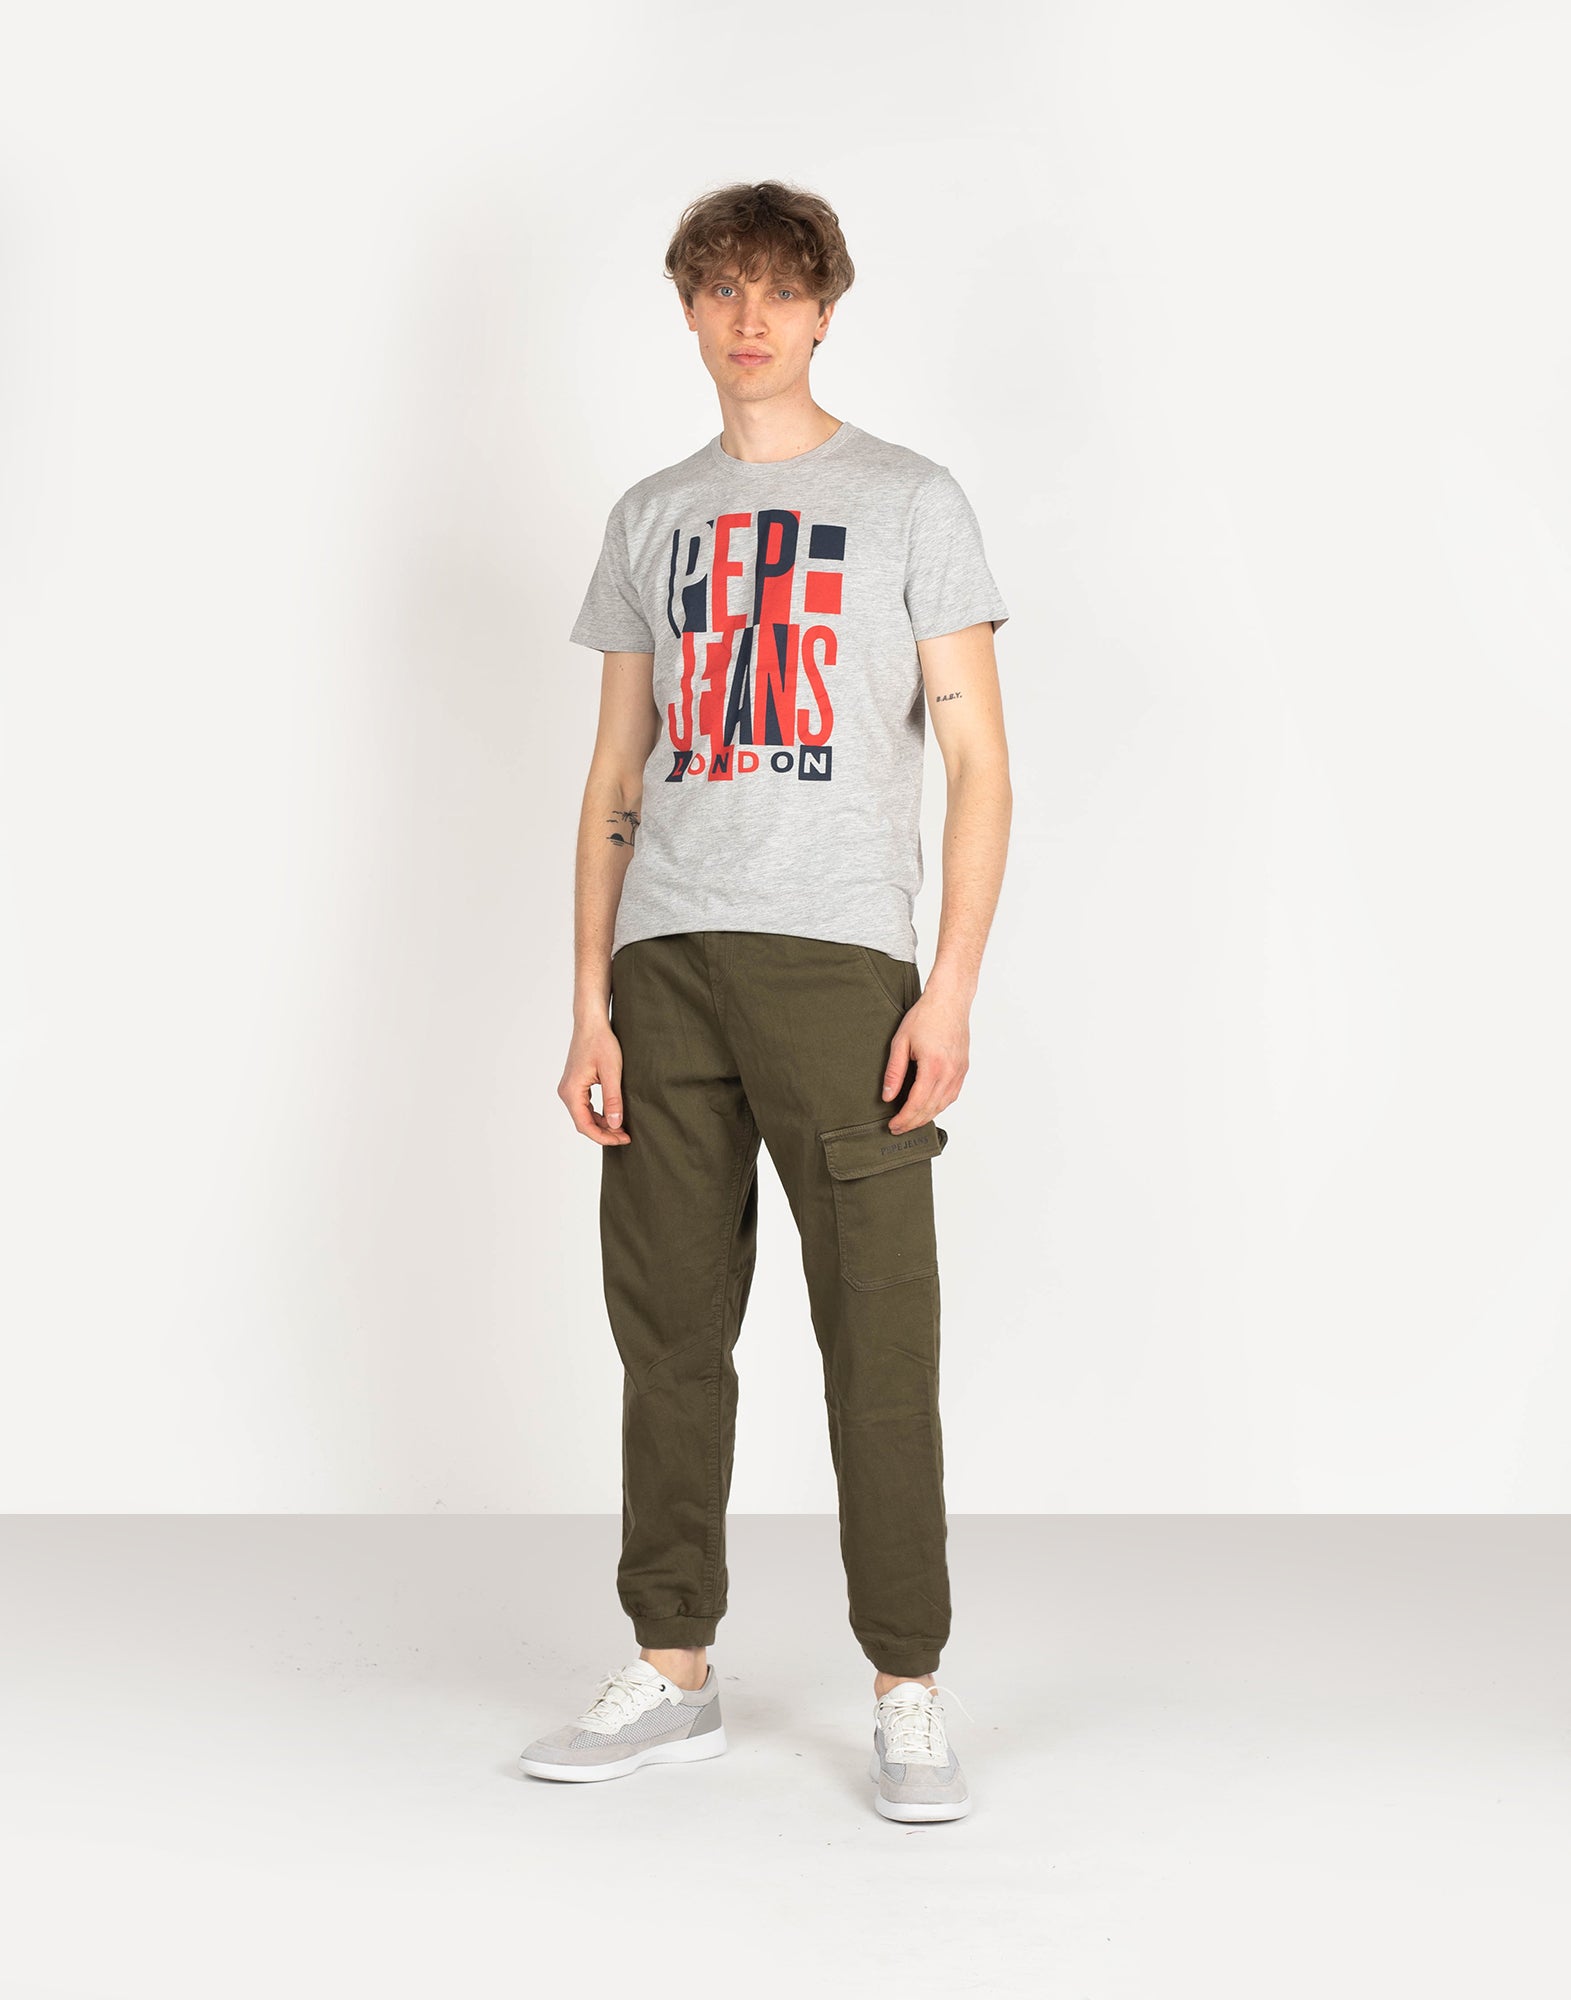 Pepe Jeans cargo pants – By Glance